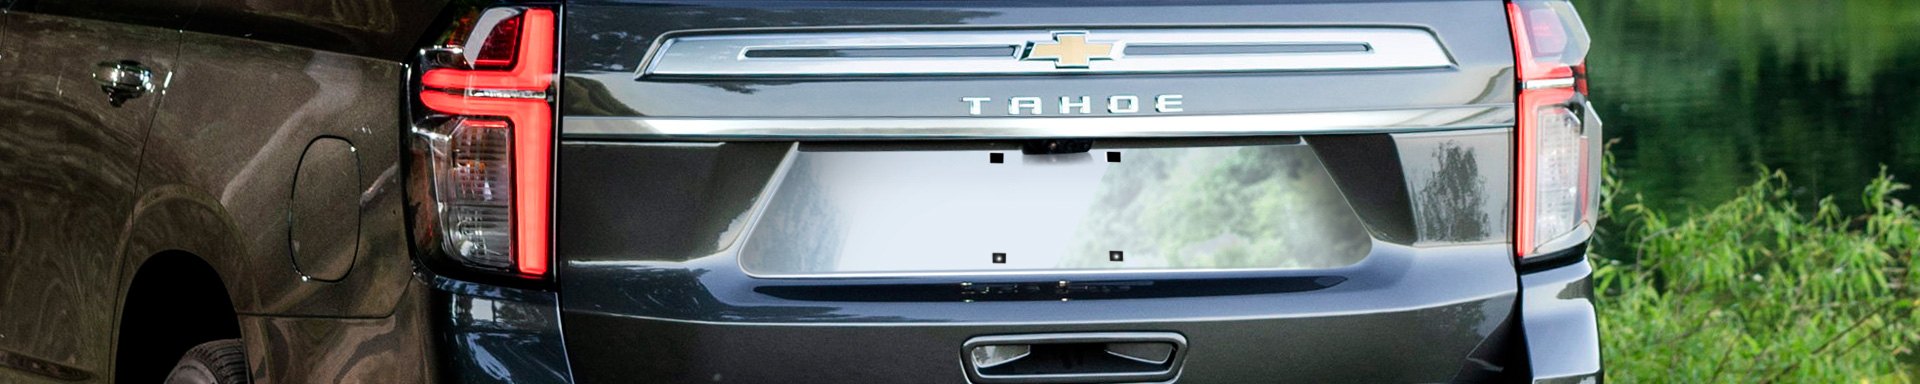 Make Your 2021 Chevy Tahoe or Suburban Shine With New SAA Chrome Trim